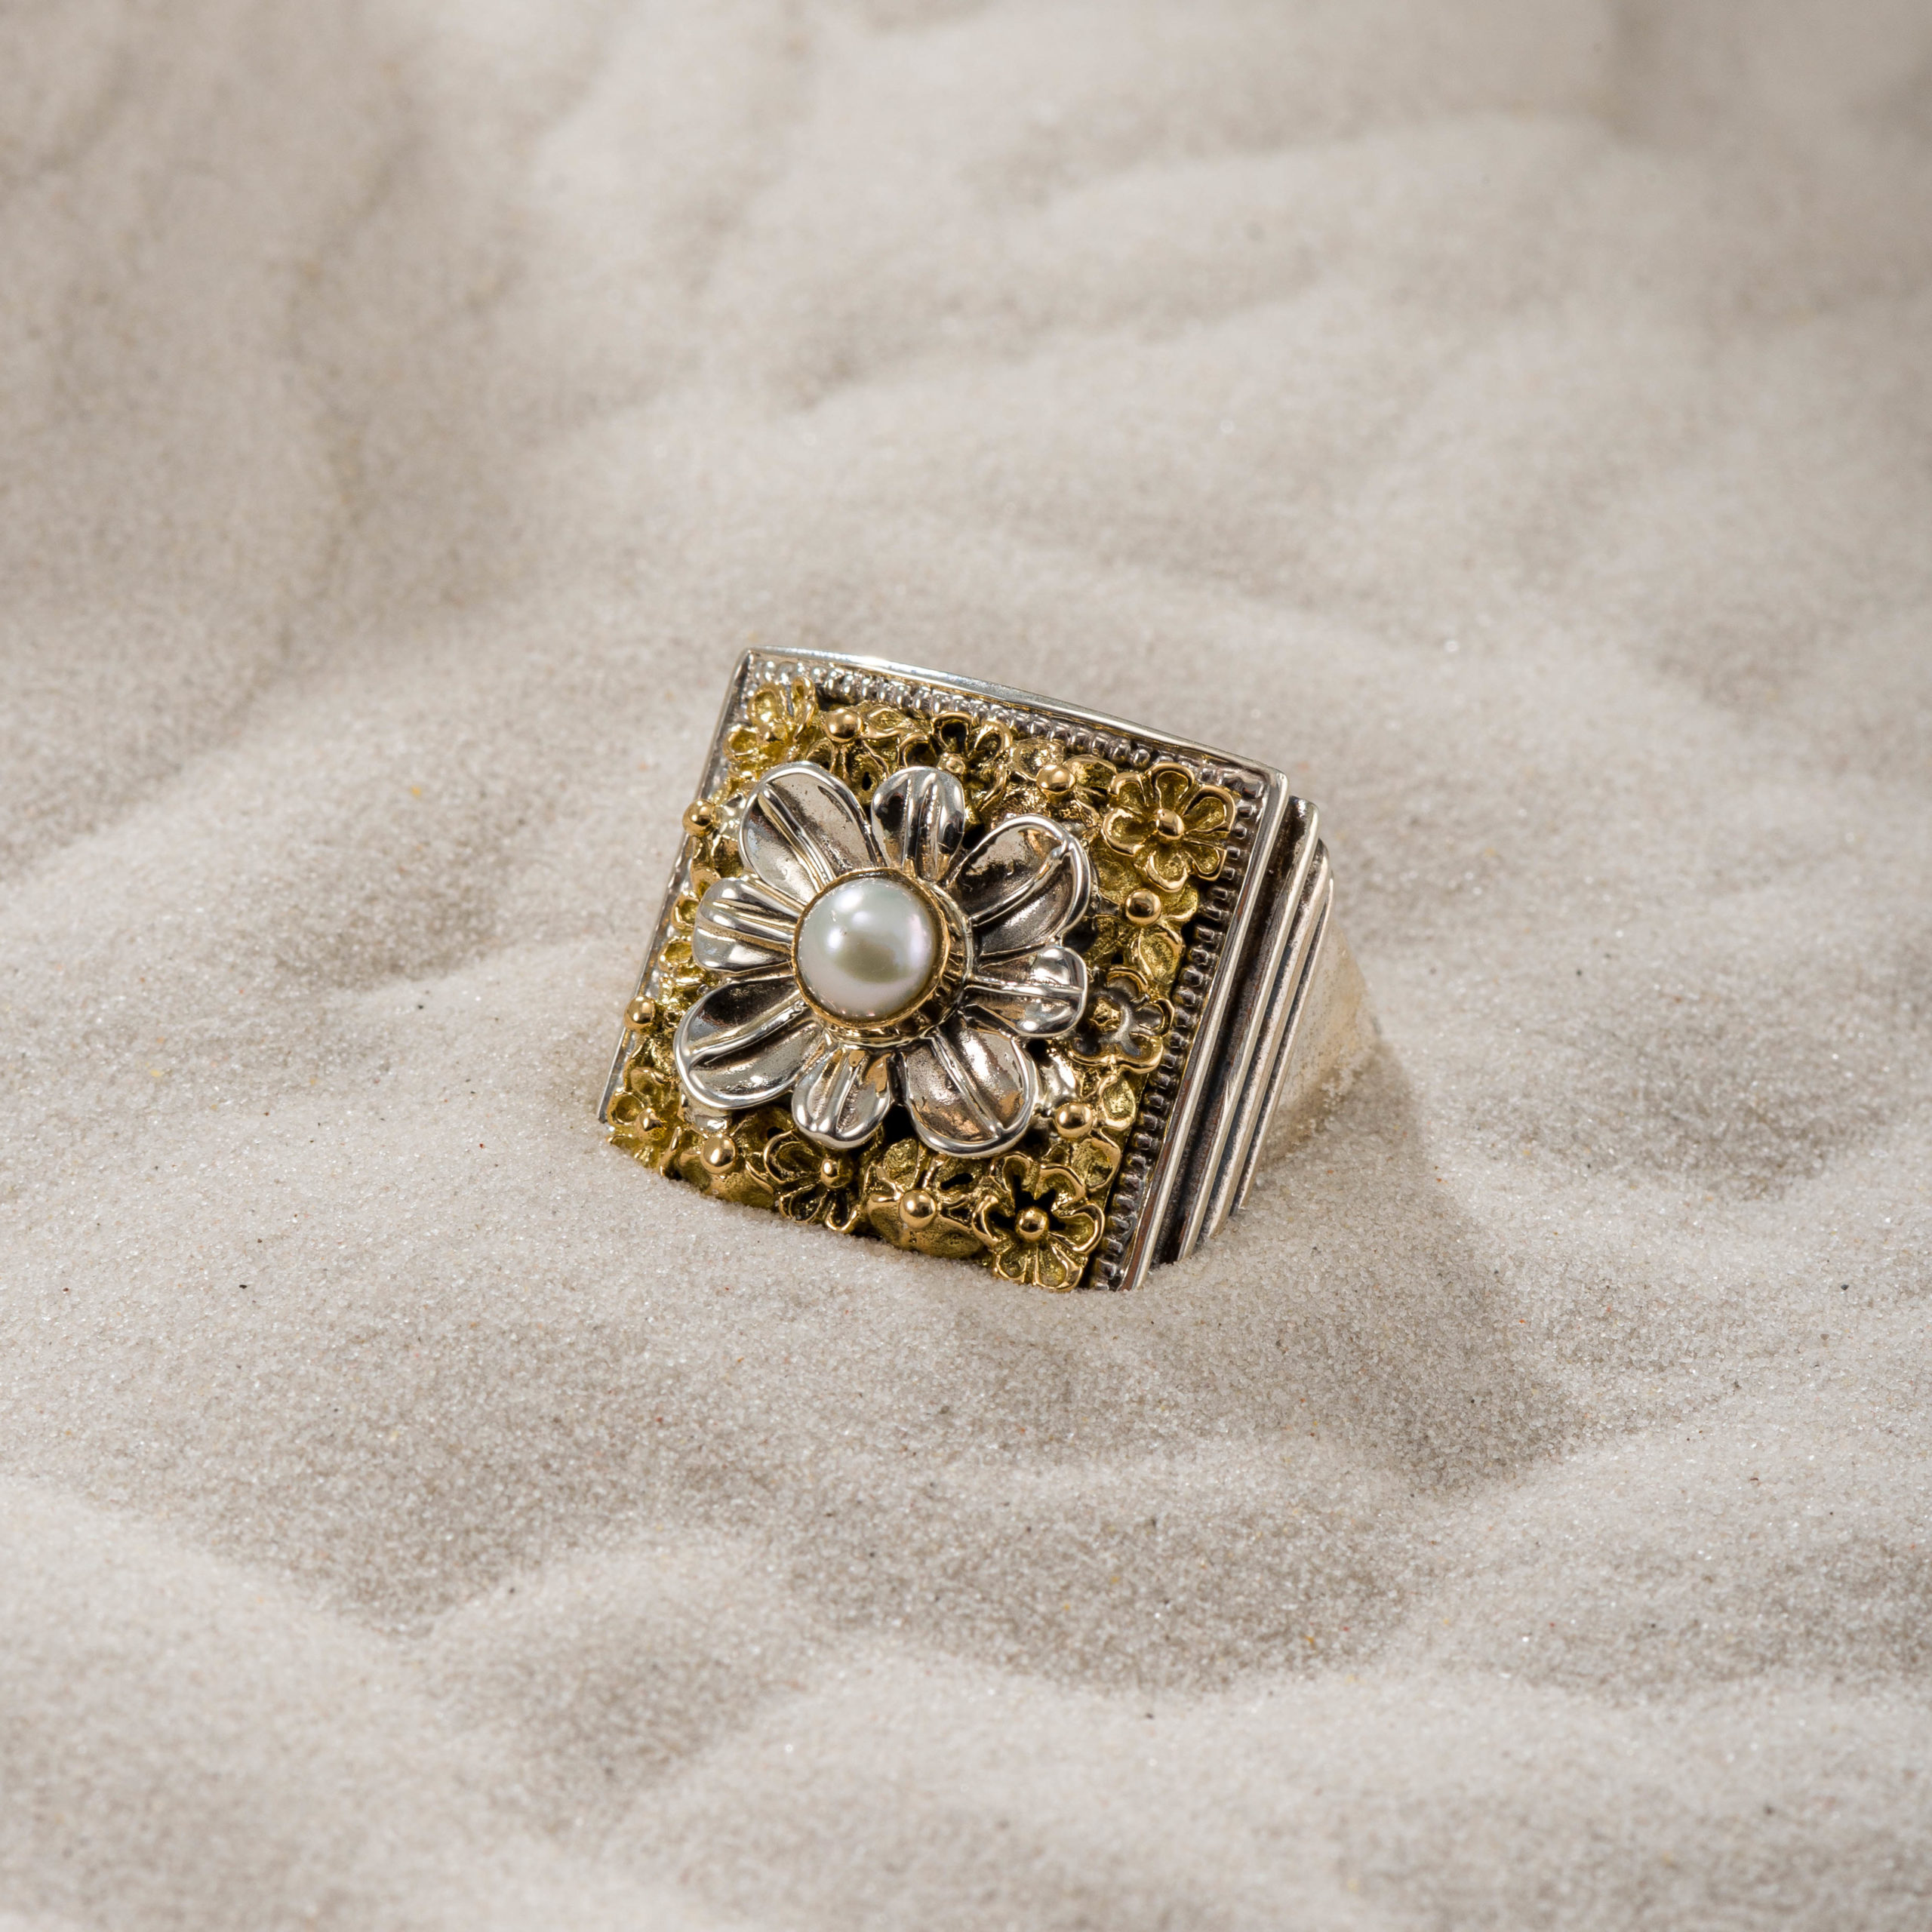 Athenian flower ring in 18K Gold and Sterling Silver with pearl